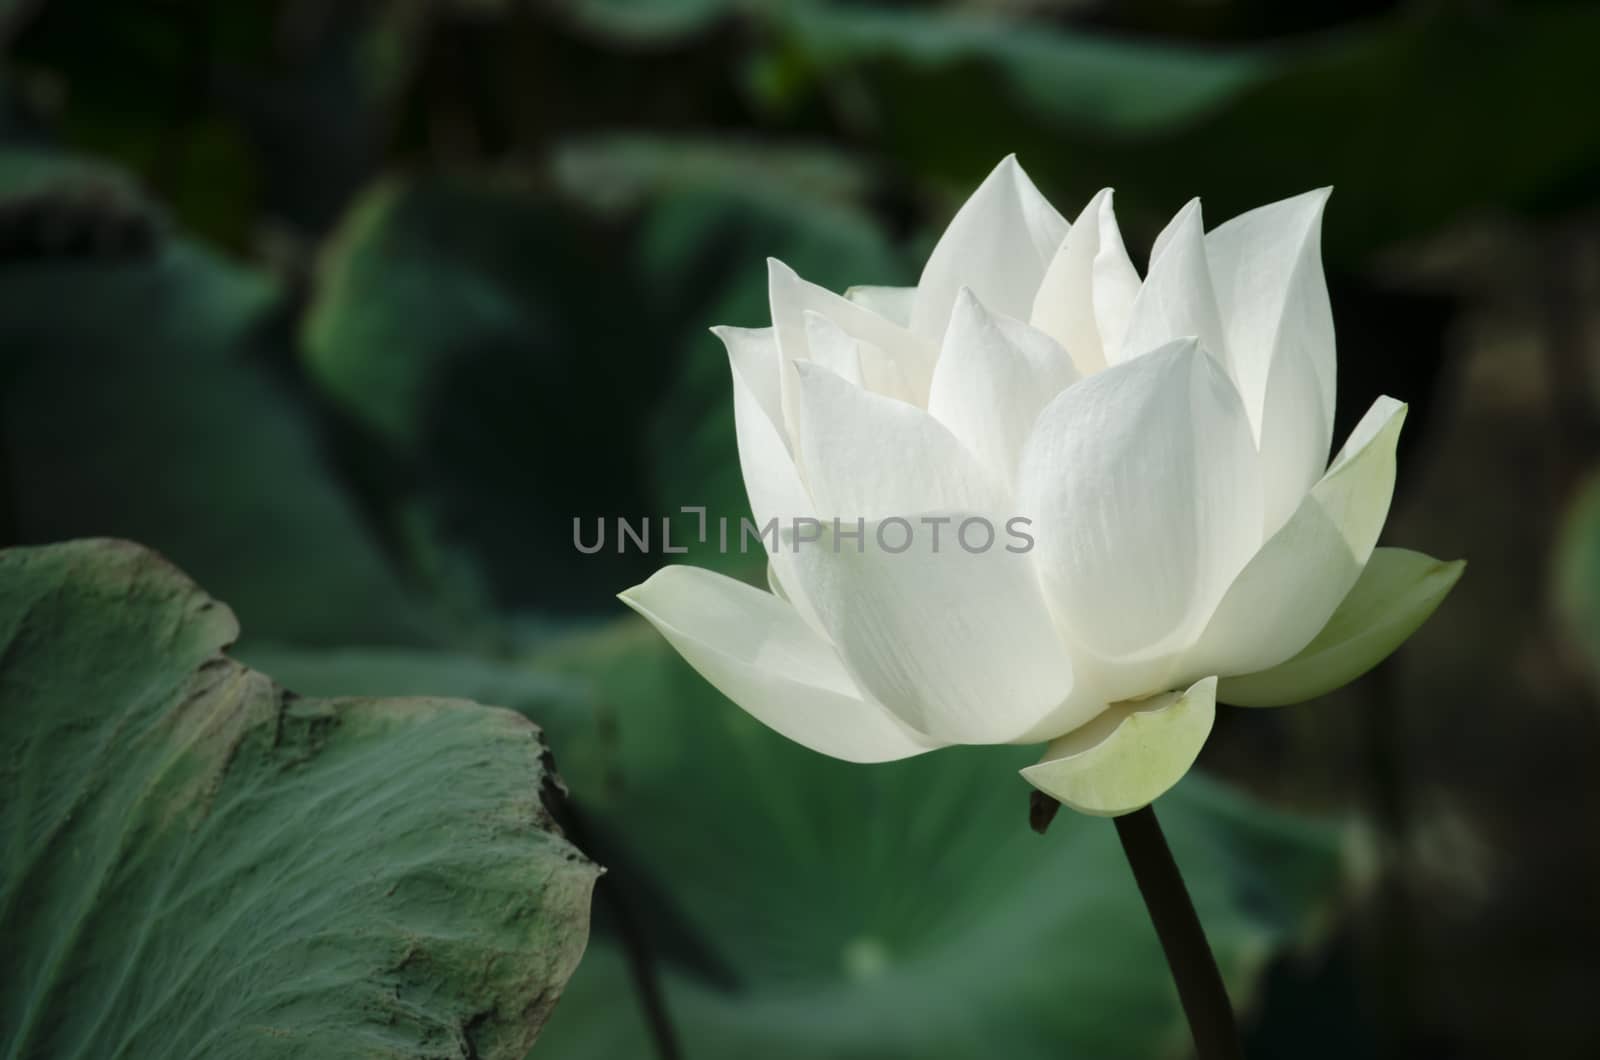 White Lotus Series 1_1 is bright in basin